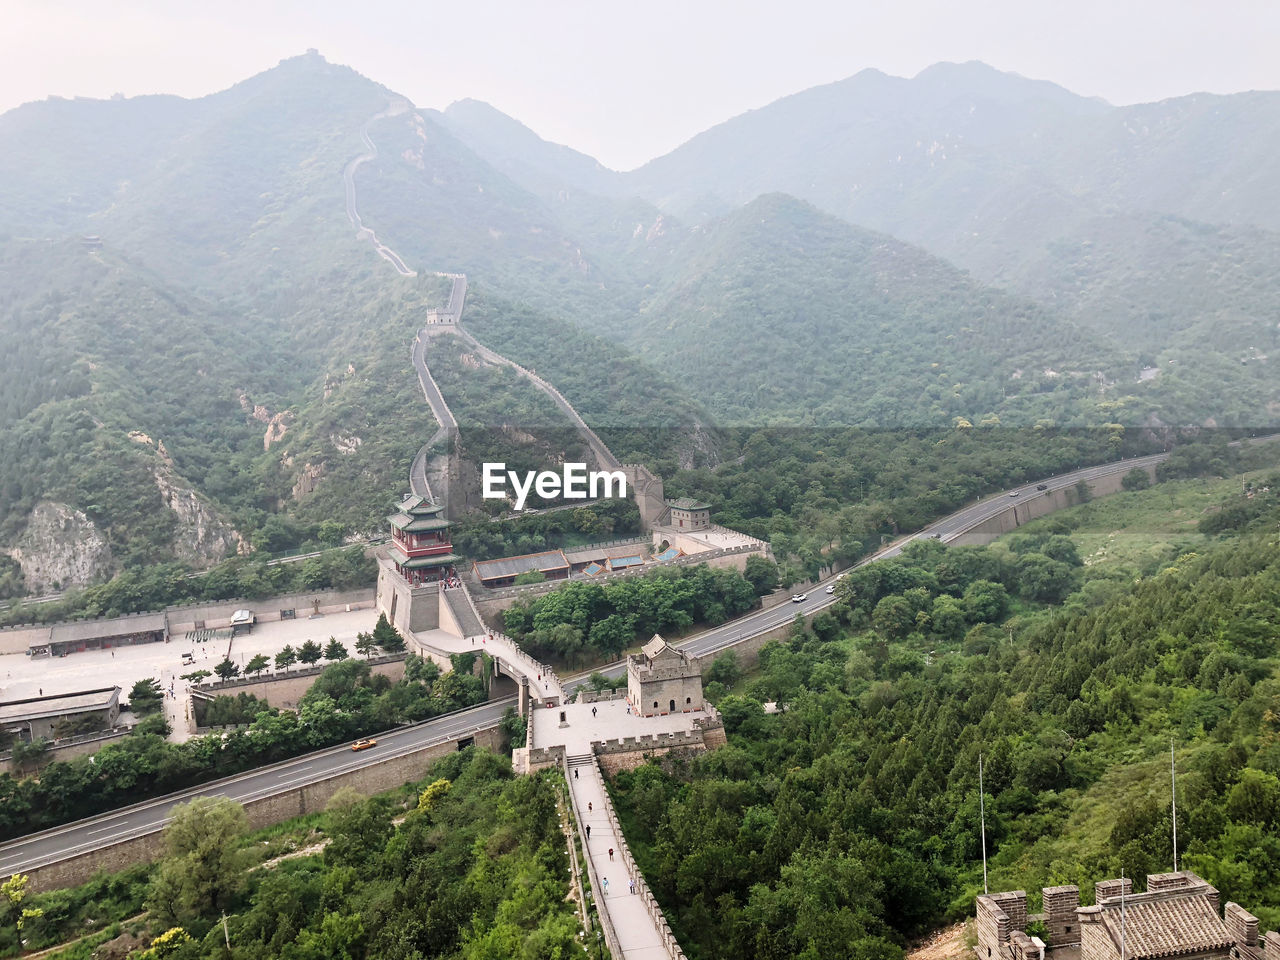 The other view of great wall